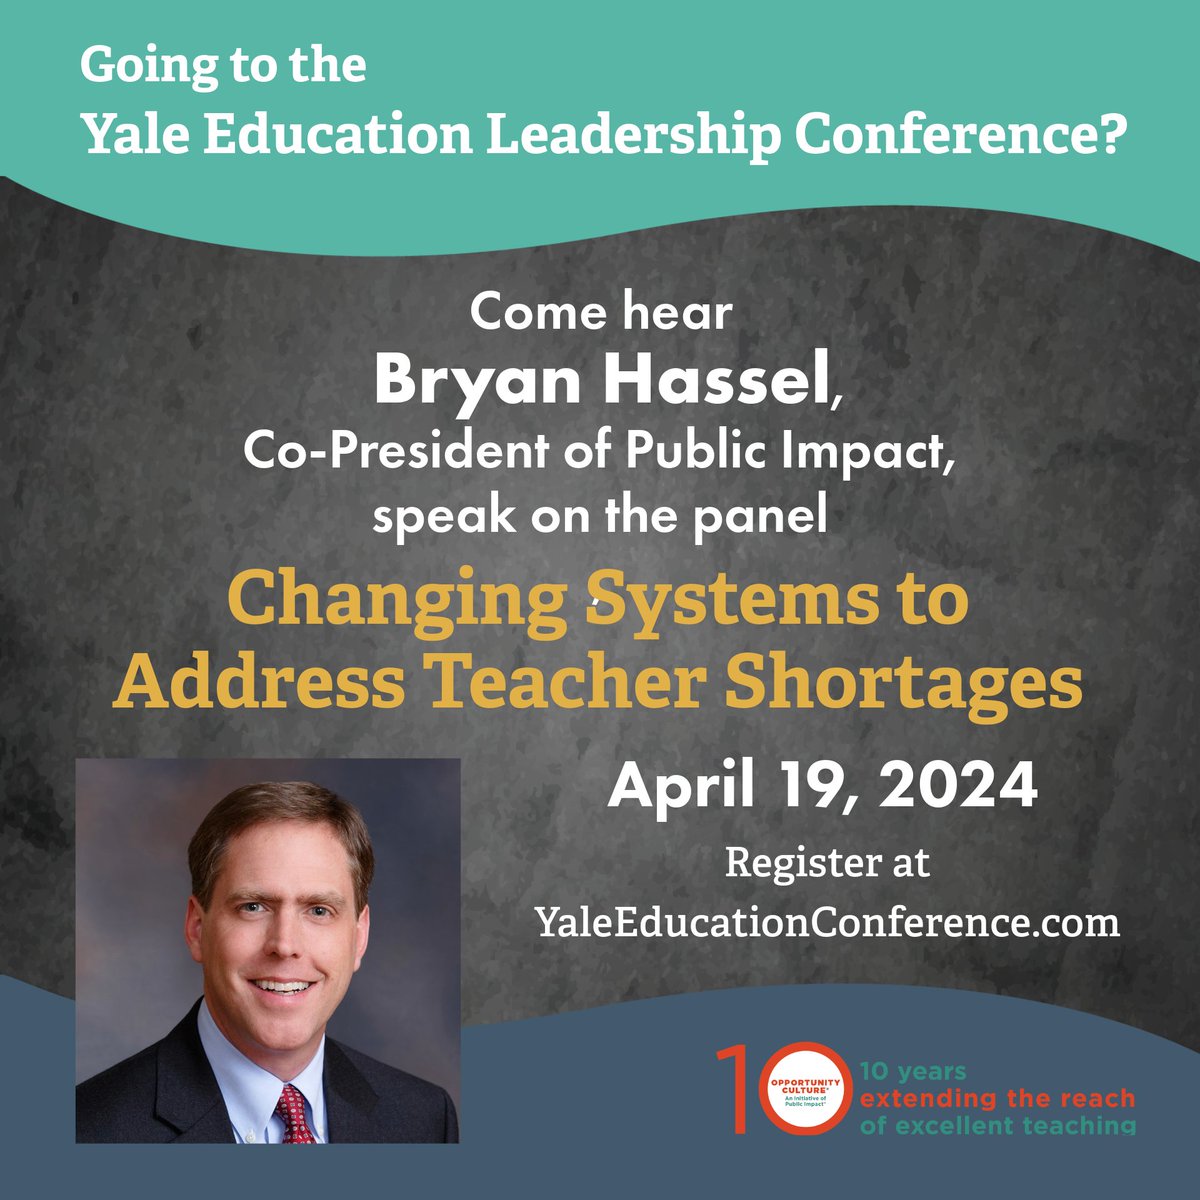 'Excited to join @YaleELC as we spotlight a key topic in education: teacher shortages. Looking forward to our co-president, Bryan Hassel, sharing insights on how changing systems can impact schools, teachers, and students. #EducationLeadership #TeacherShortages'